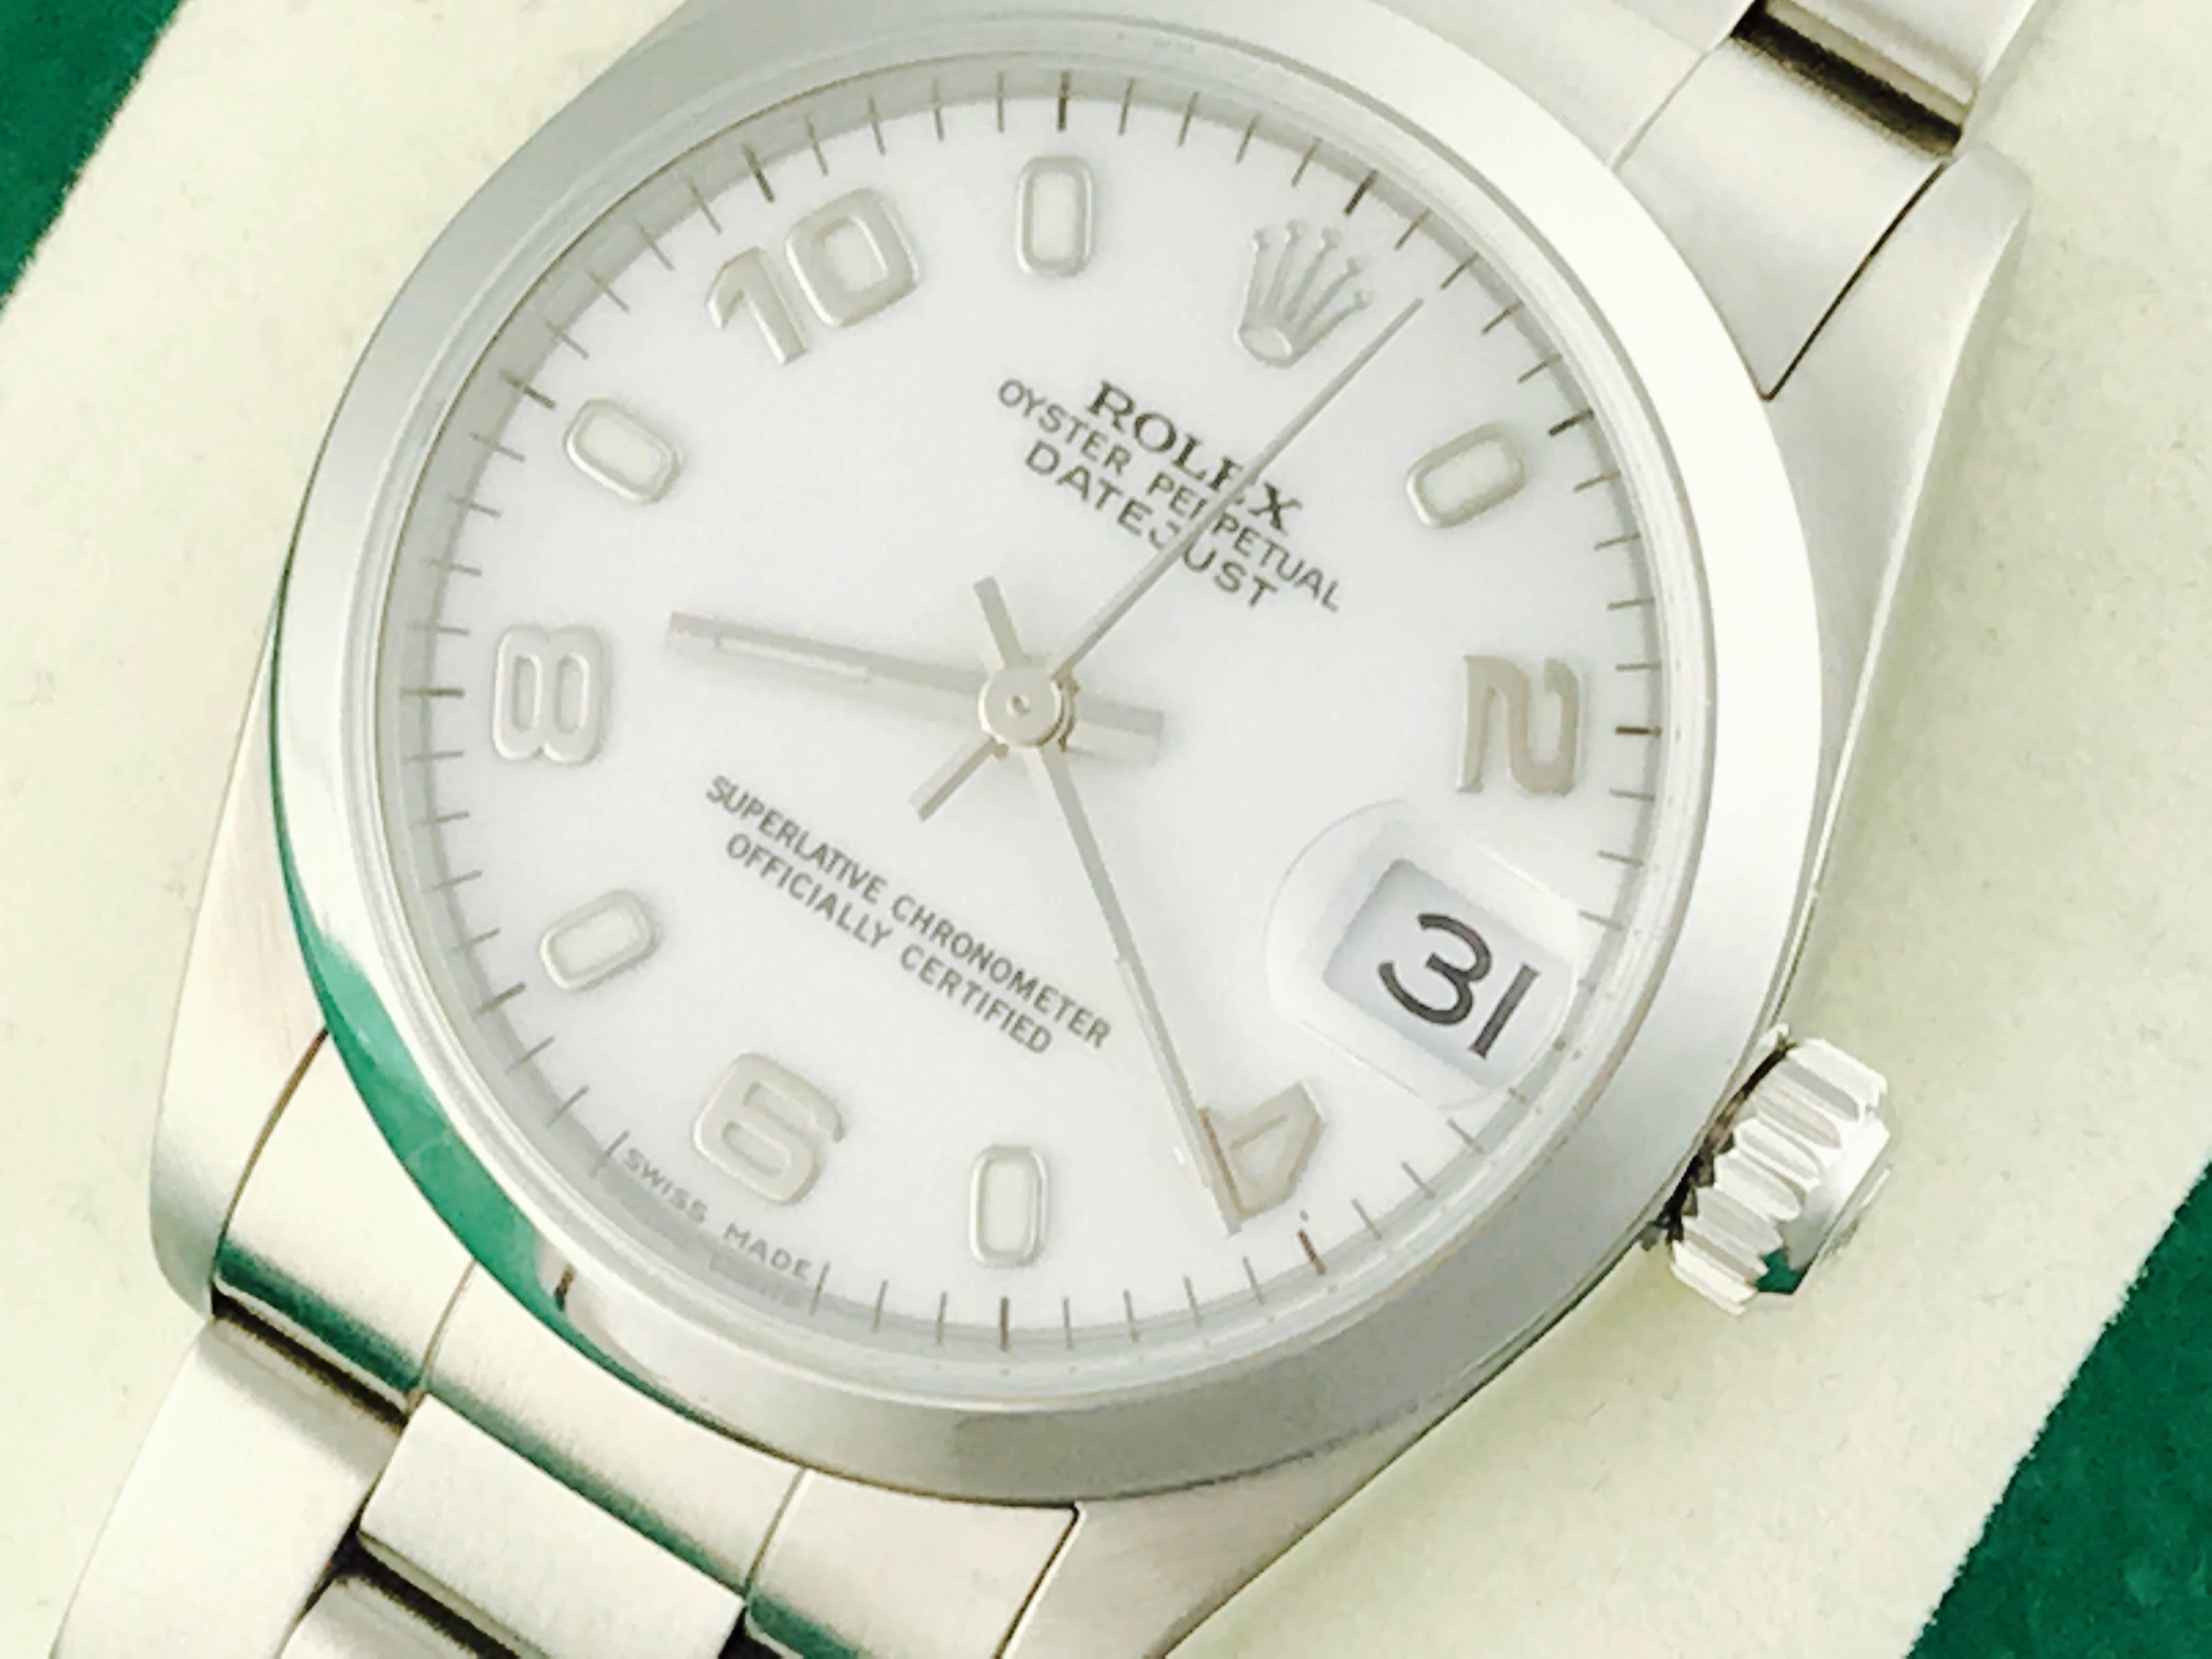 Rolex Datejust Model 68240 Stainless Steel Automatic Midsize Wristwatch. Certified pre-owned and ready to ship.  Stainless Steel case with smooth bezel, 30mm diameter.  Stainless Steel oyster bracelet. White dial with steel Arabic numerals.  Box,